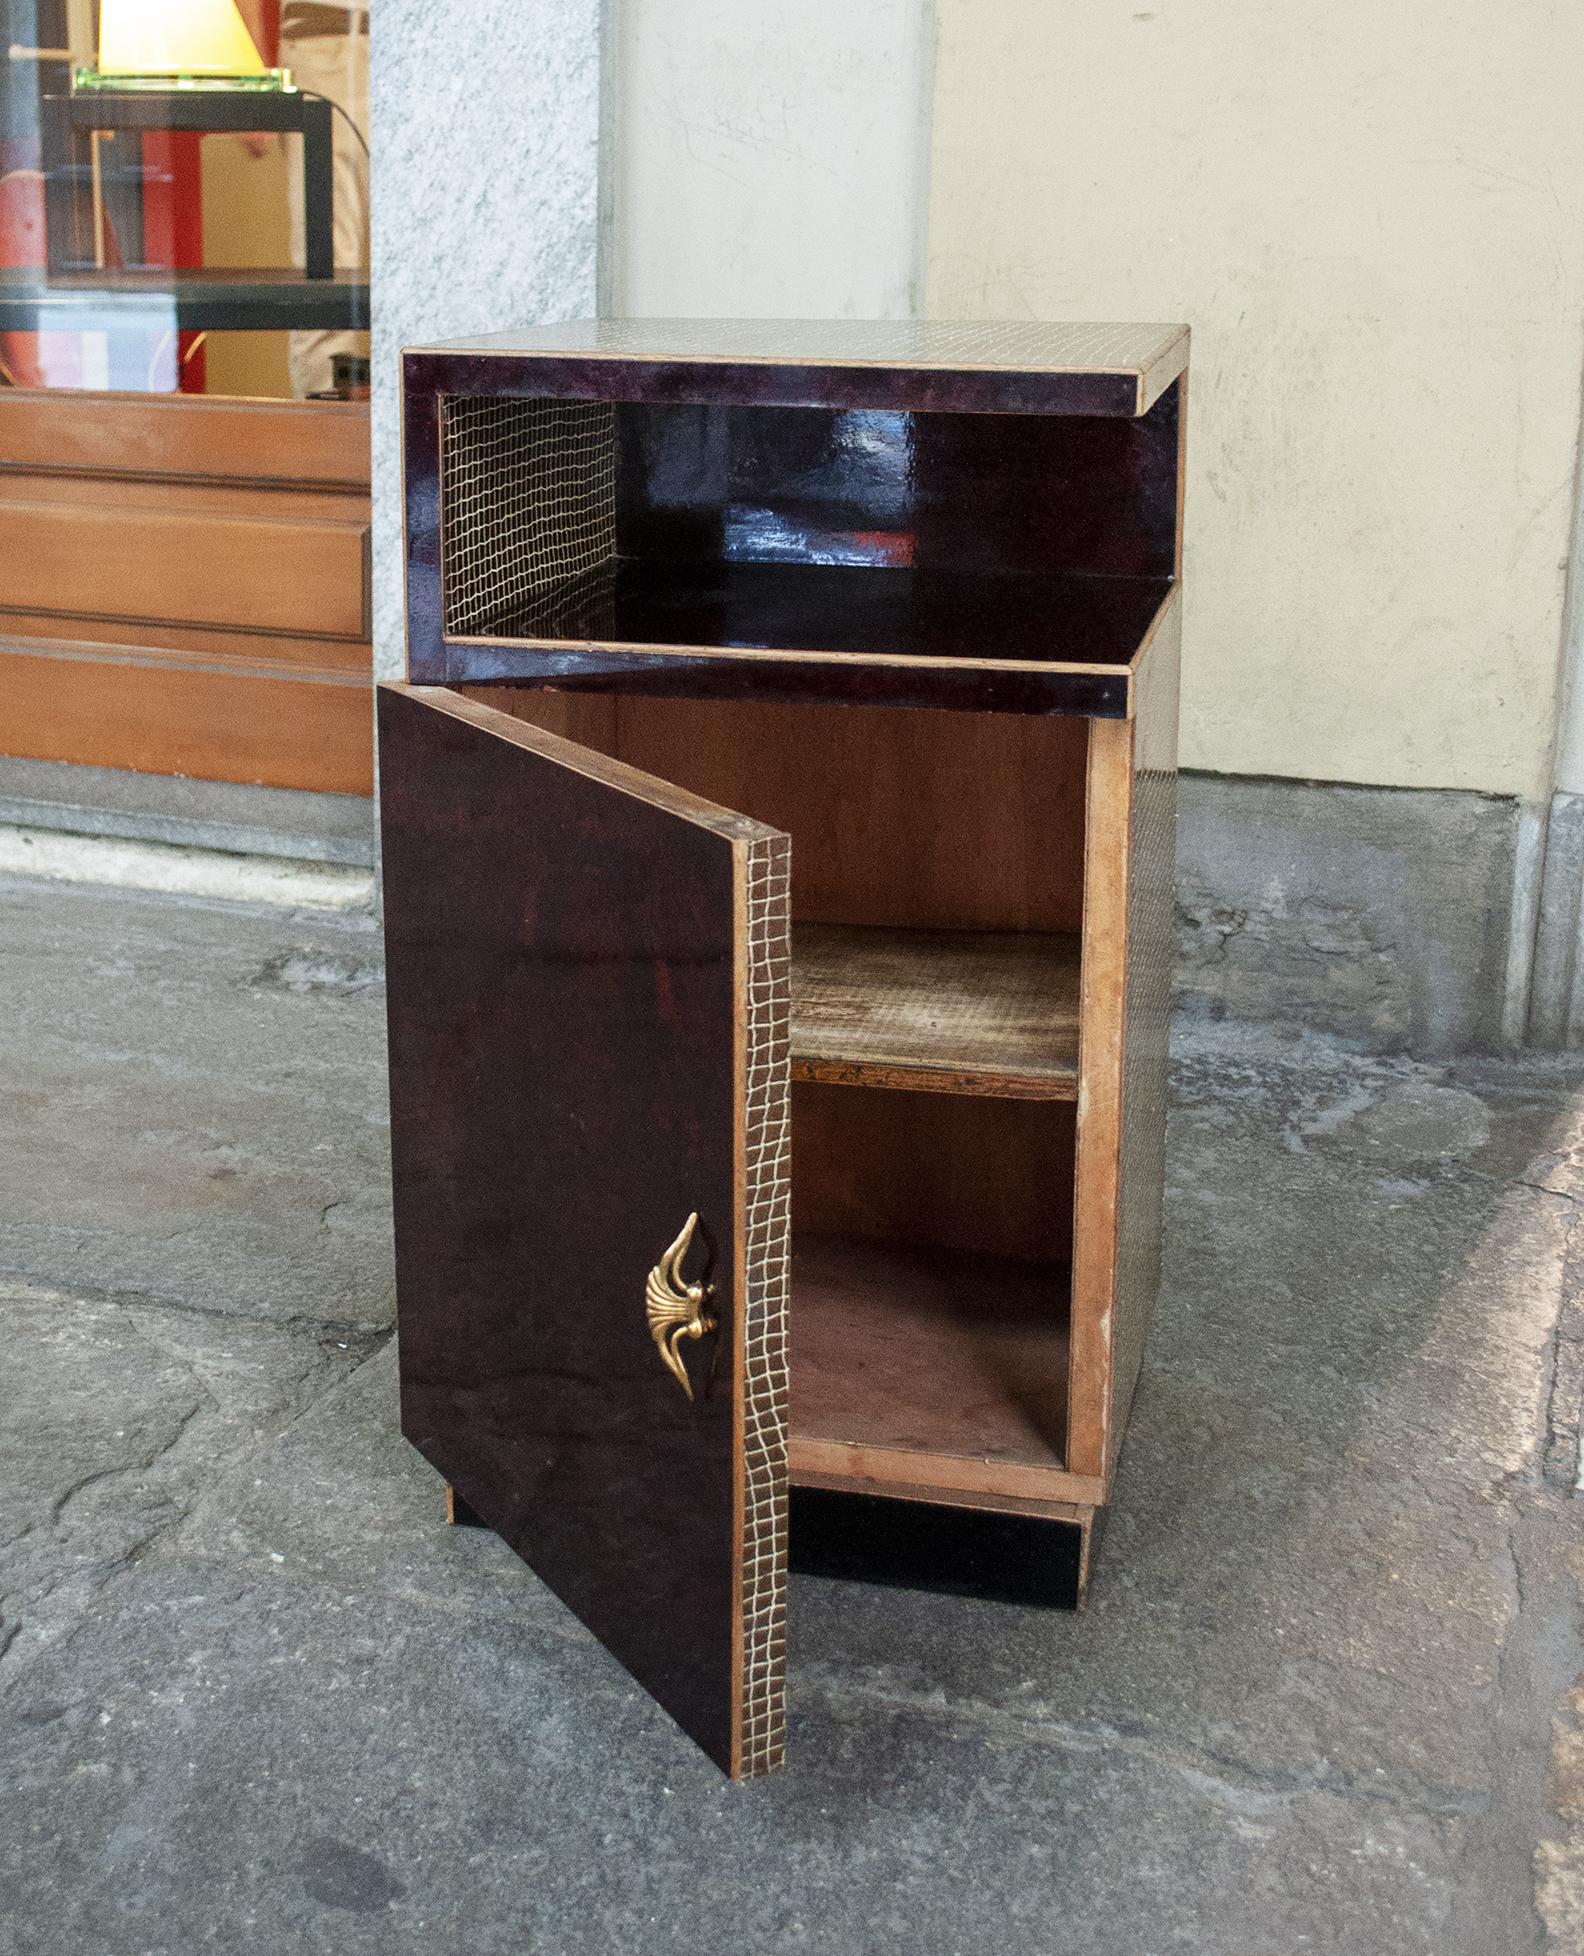 Bedside table in wood, with resin and mesh covering
Art Deco
Italian production
1930s.